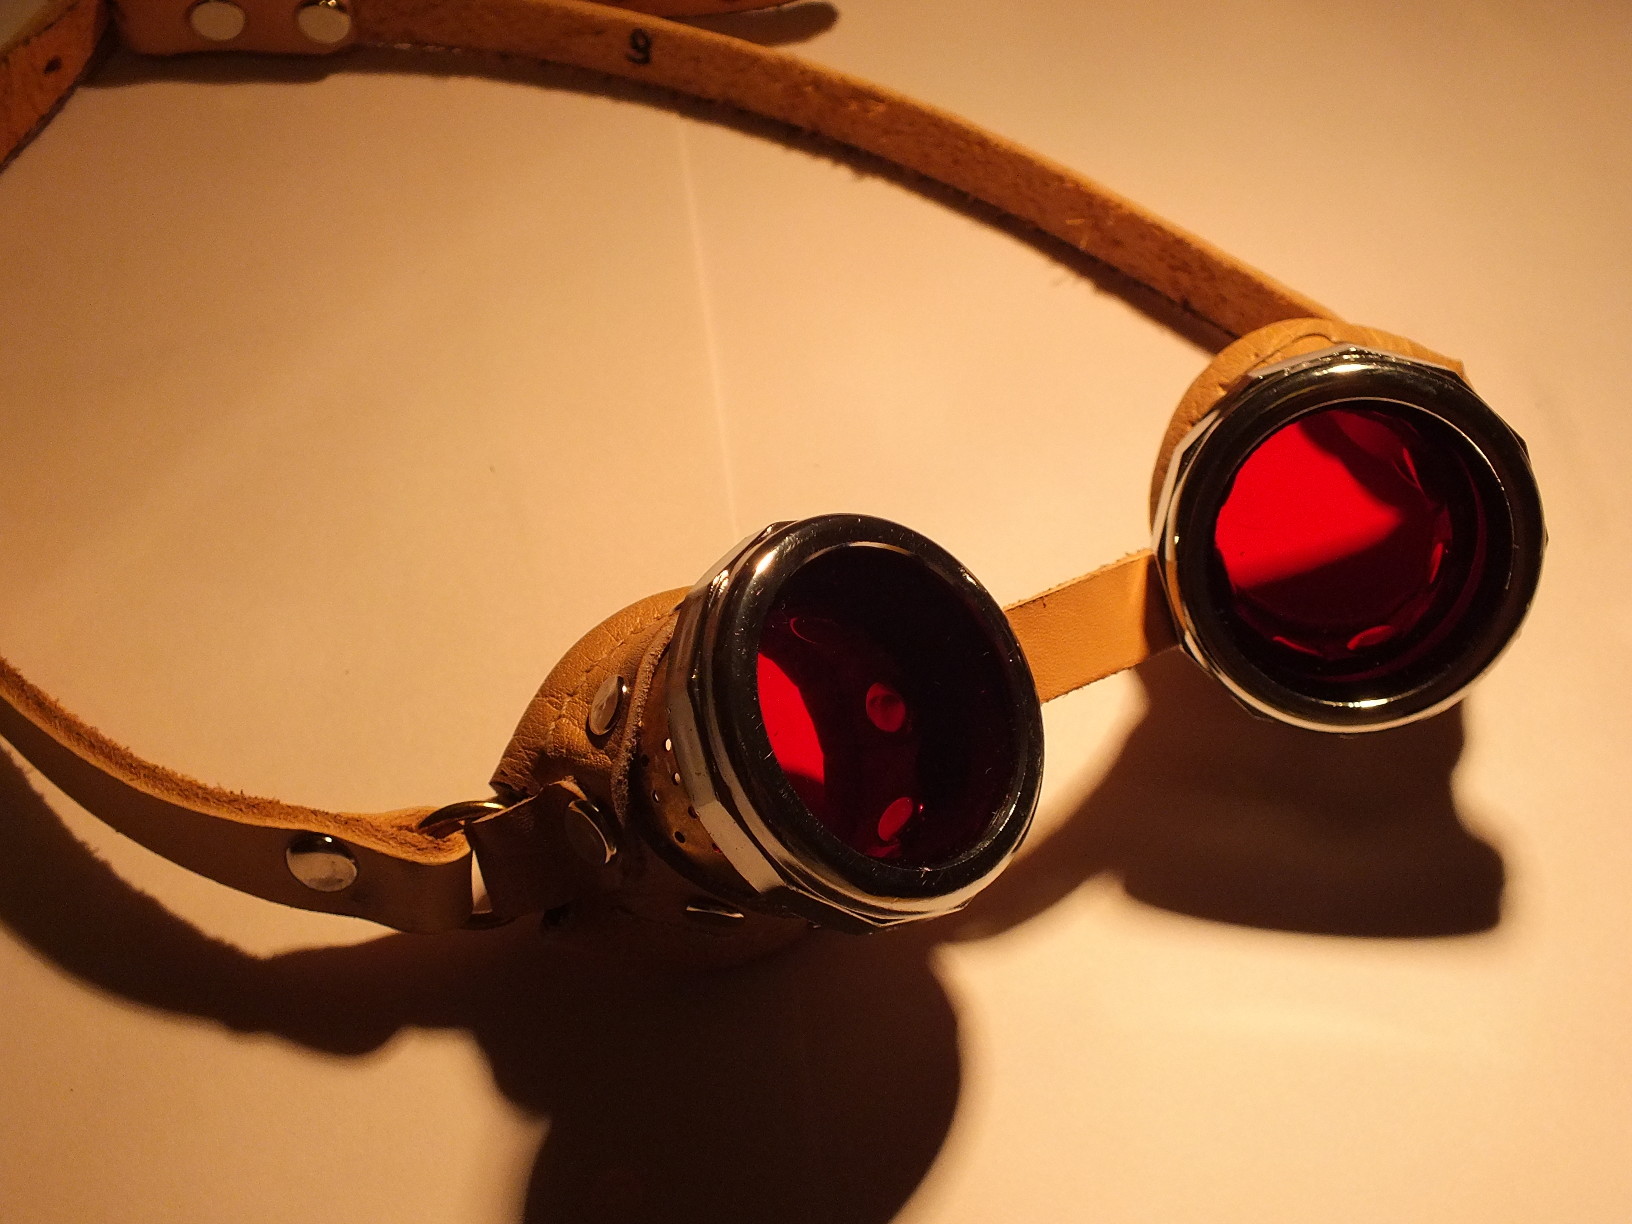 How to Make Steampunk Goggles (Part 2)